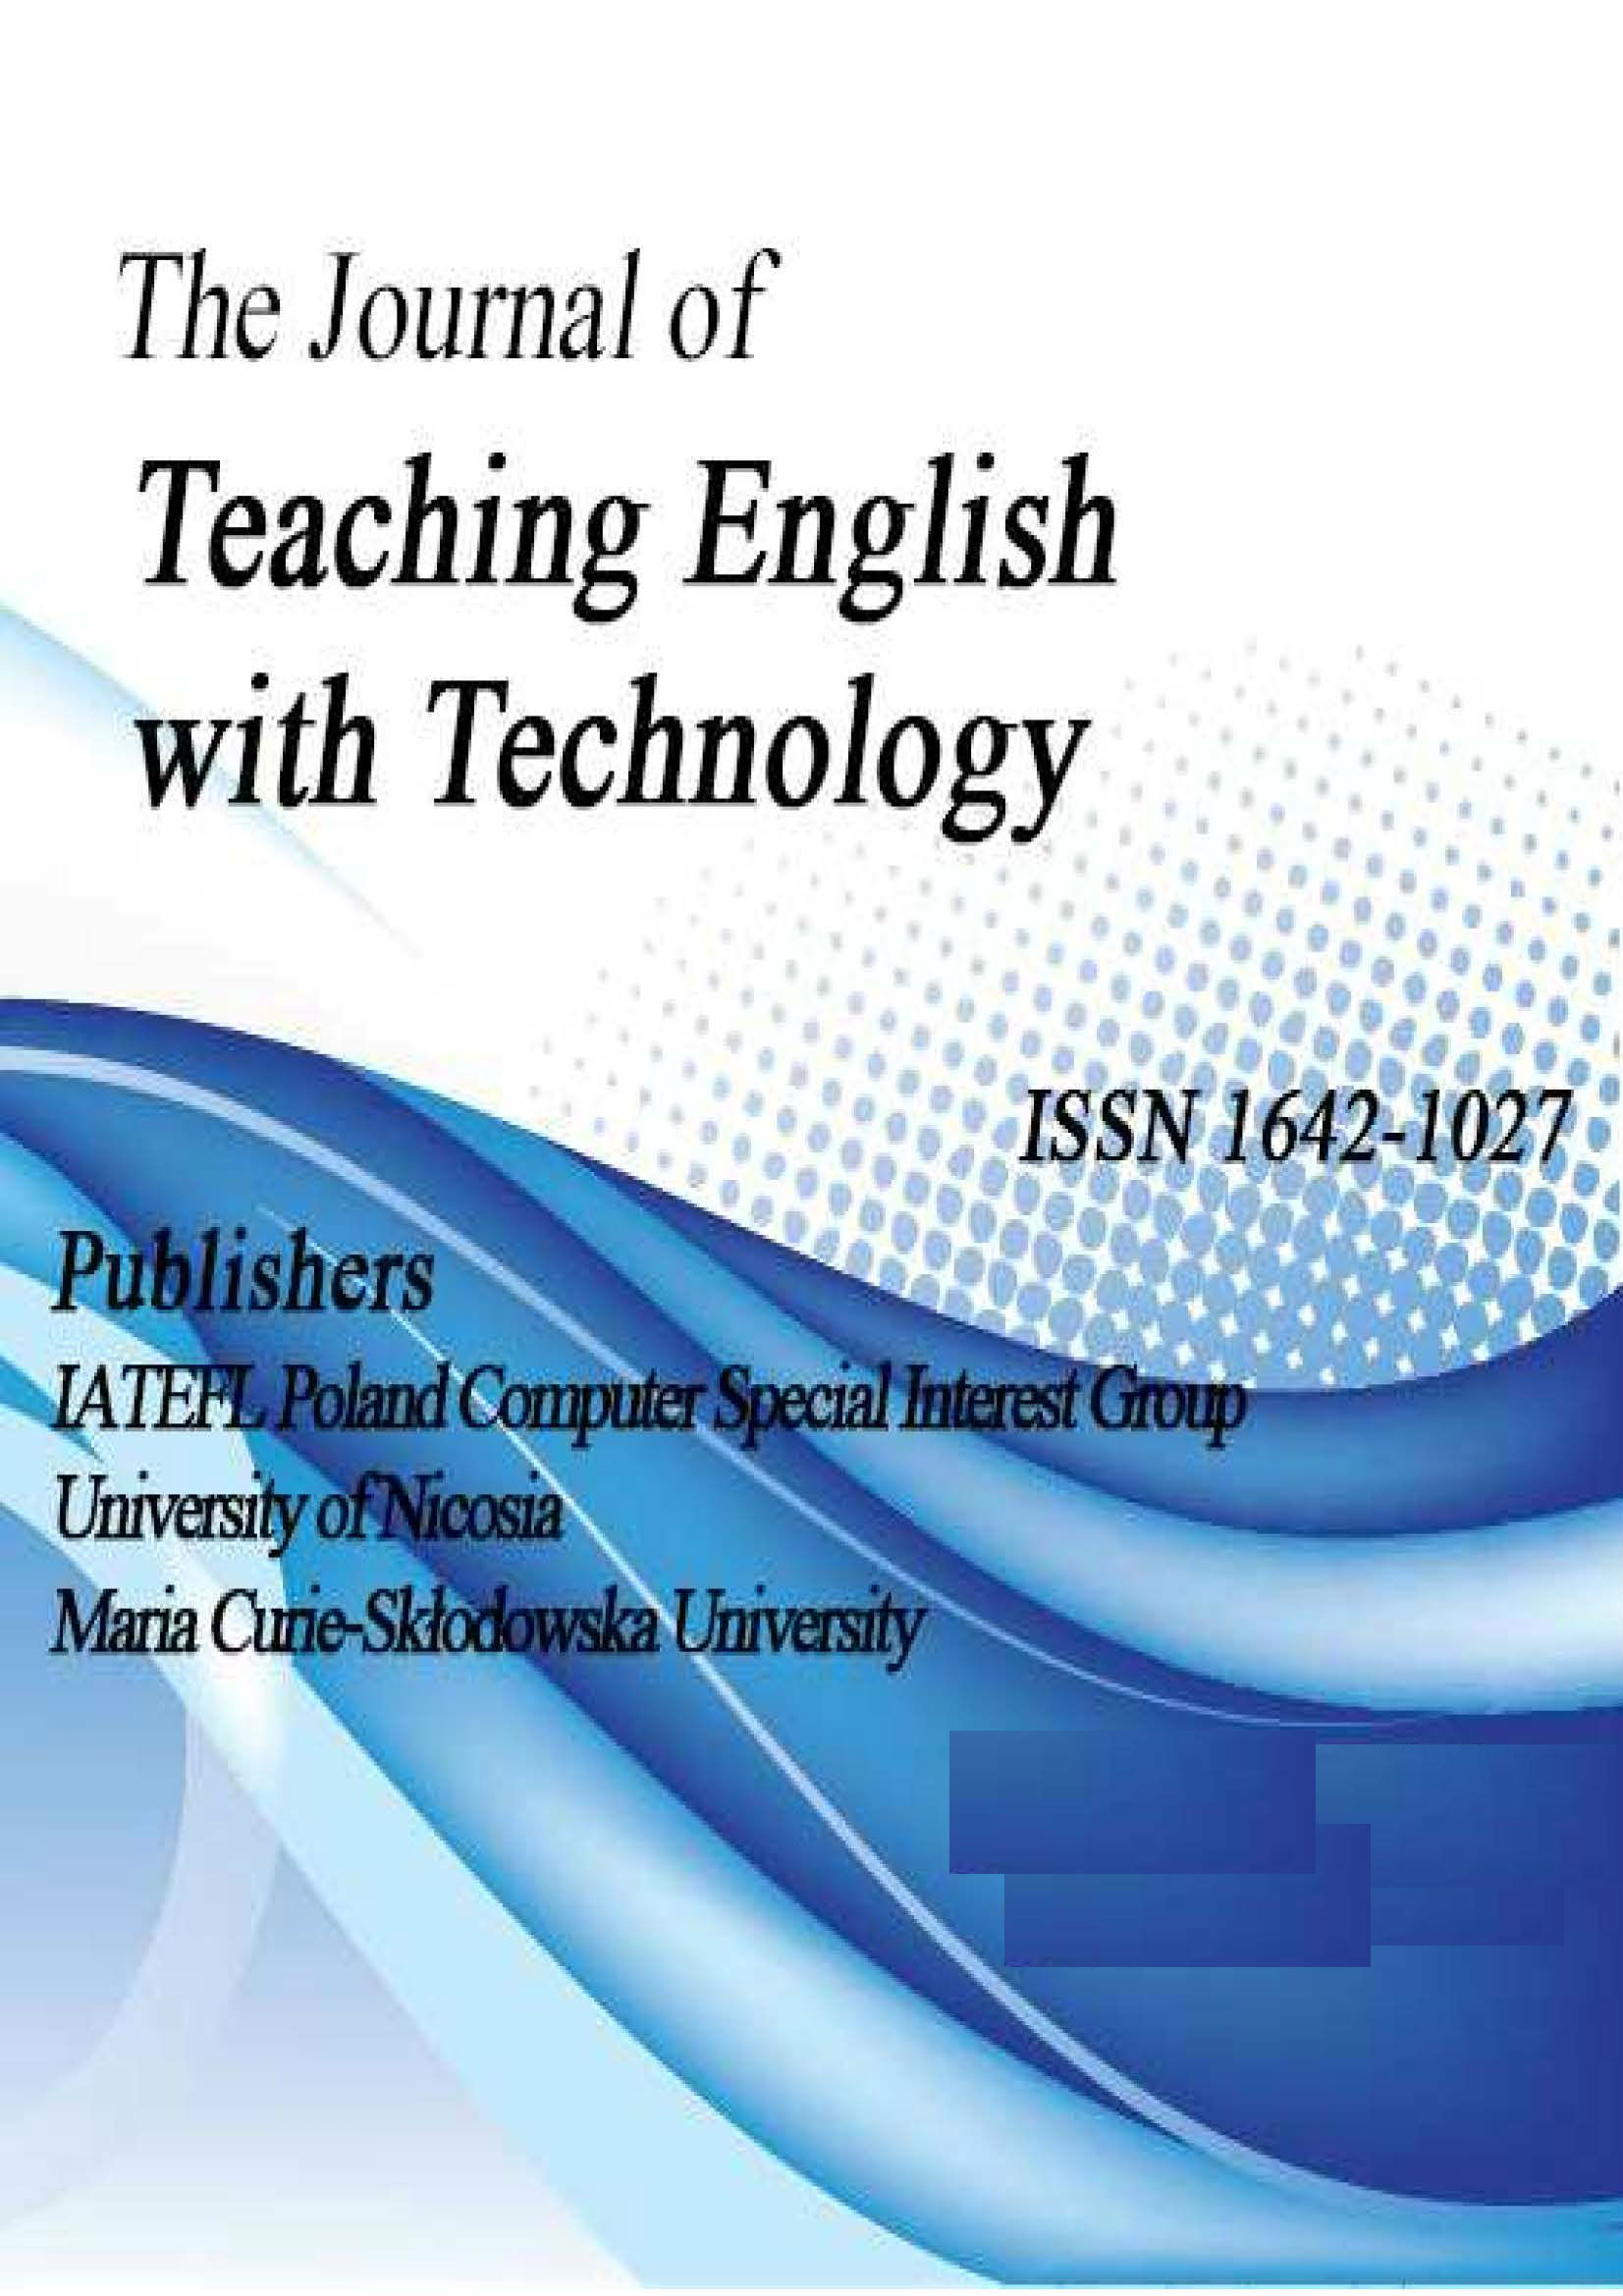 USING TAILOR-MADE YOUTUBE VIDEOS AS A PRETEACHING STRATEGY FOR ENGLISH LANGUAGE LEARNERS IN MOROCCO: TOWARDS A HYBRID LANGUAGE LEARNING COURSE